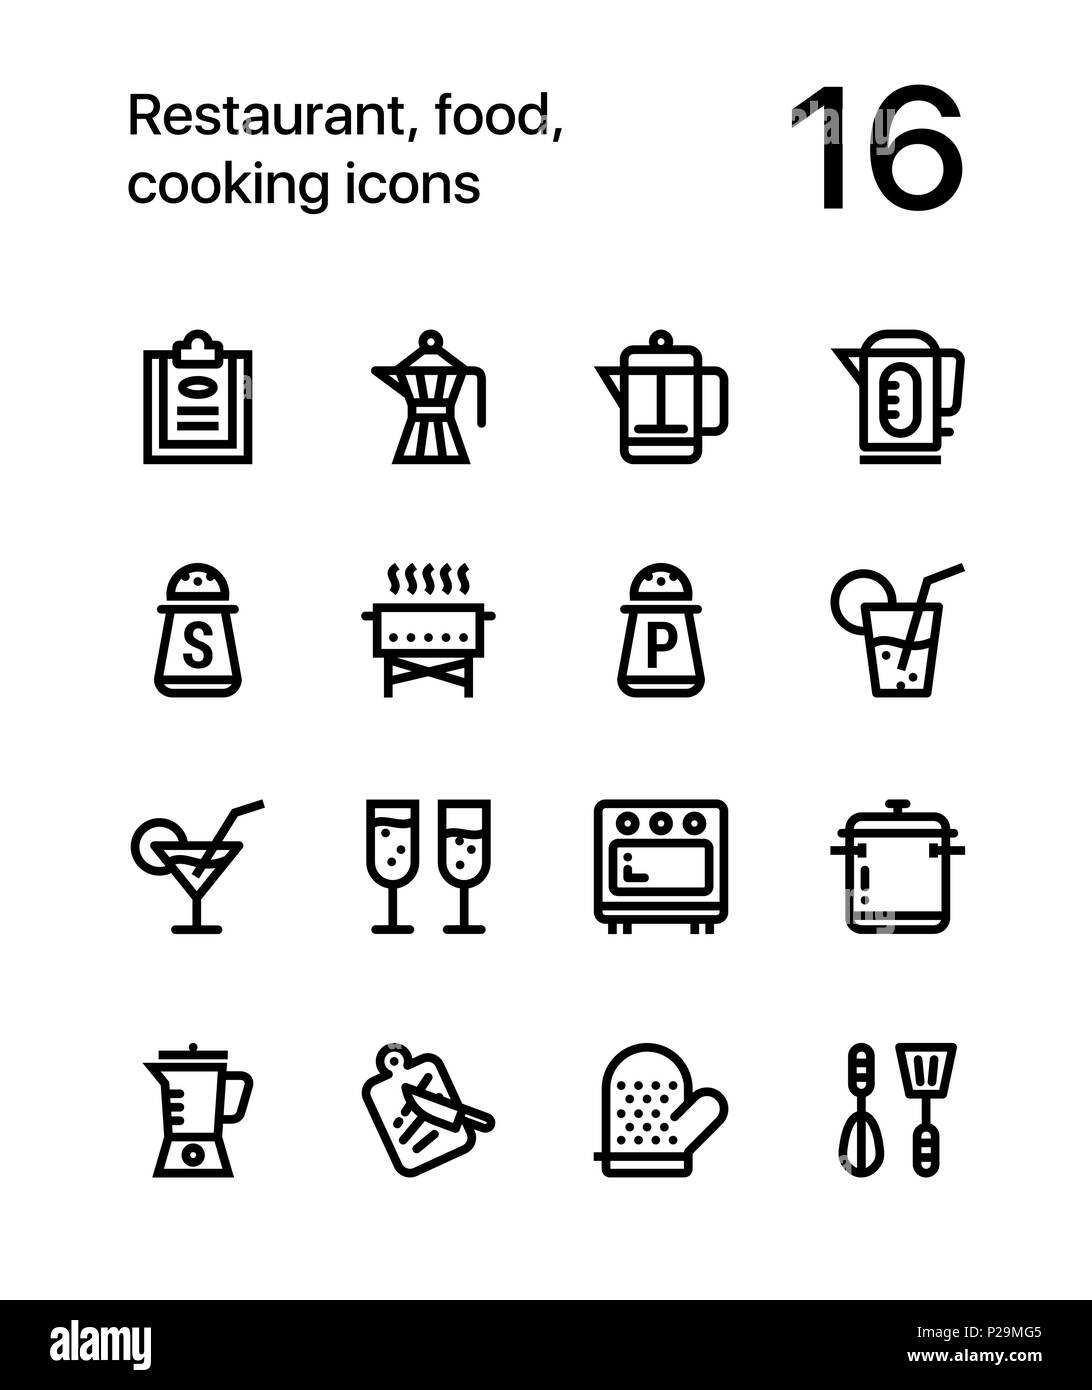 Restaurant, food, cooking icons for web and mobile design pack 2 Stock Vector